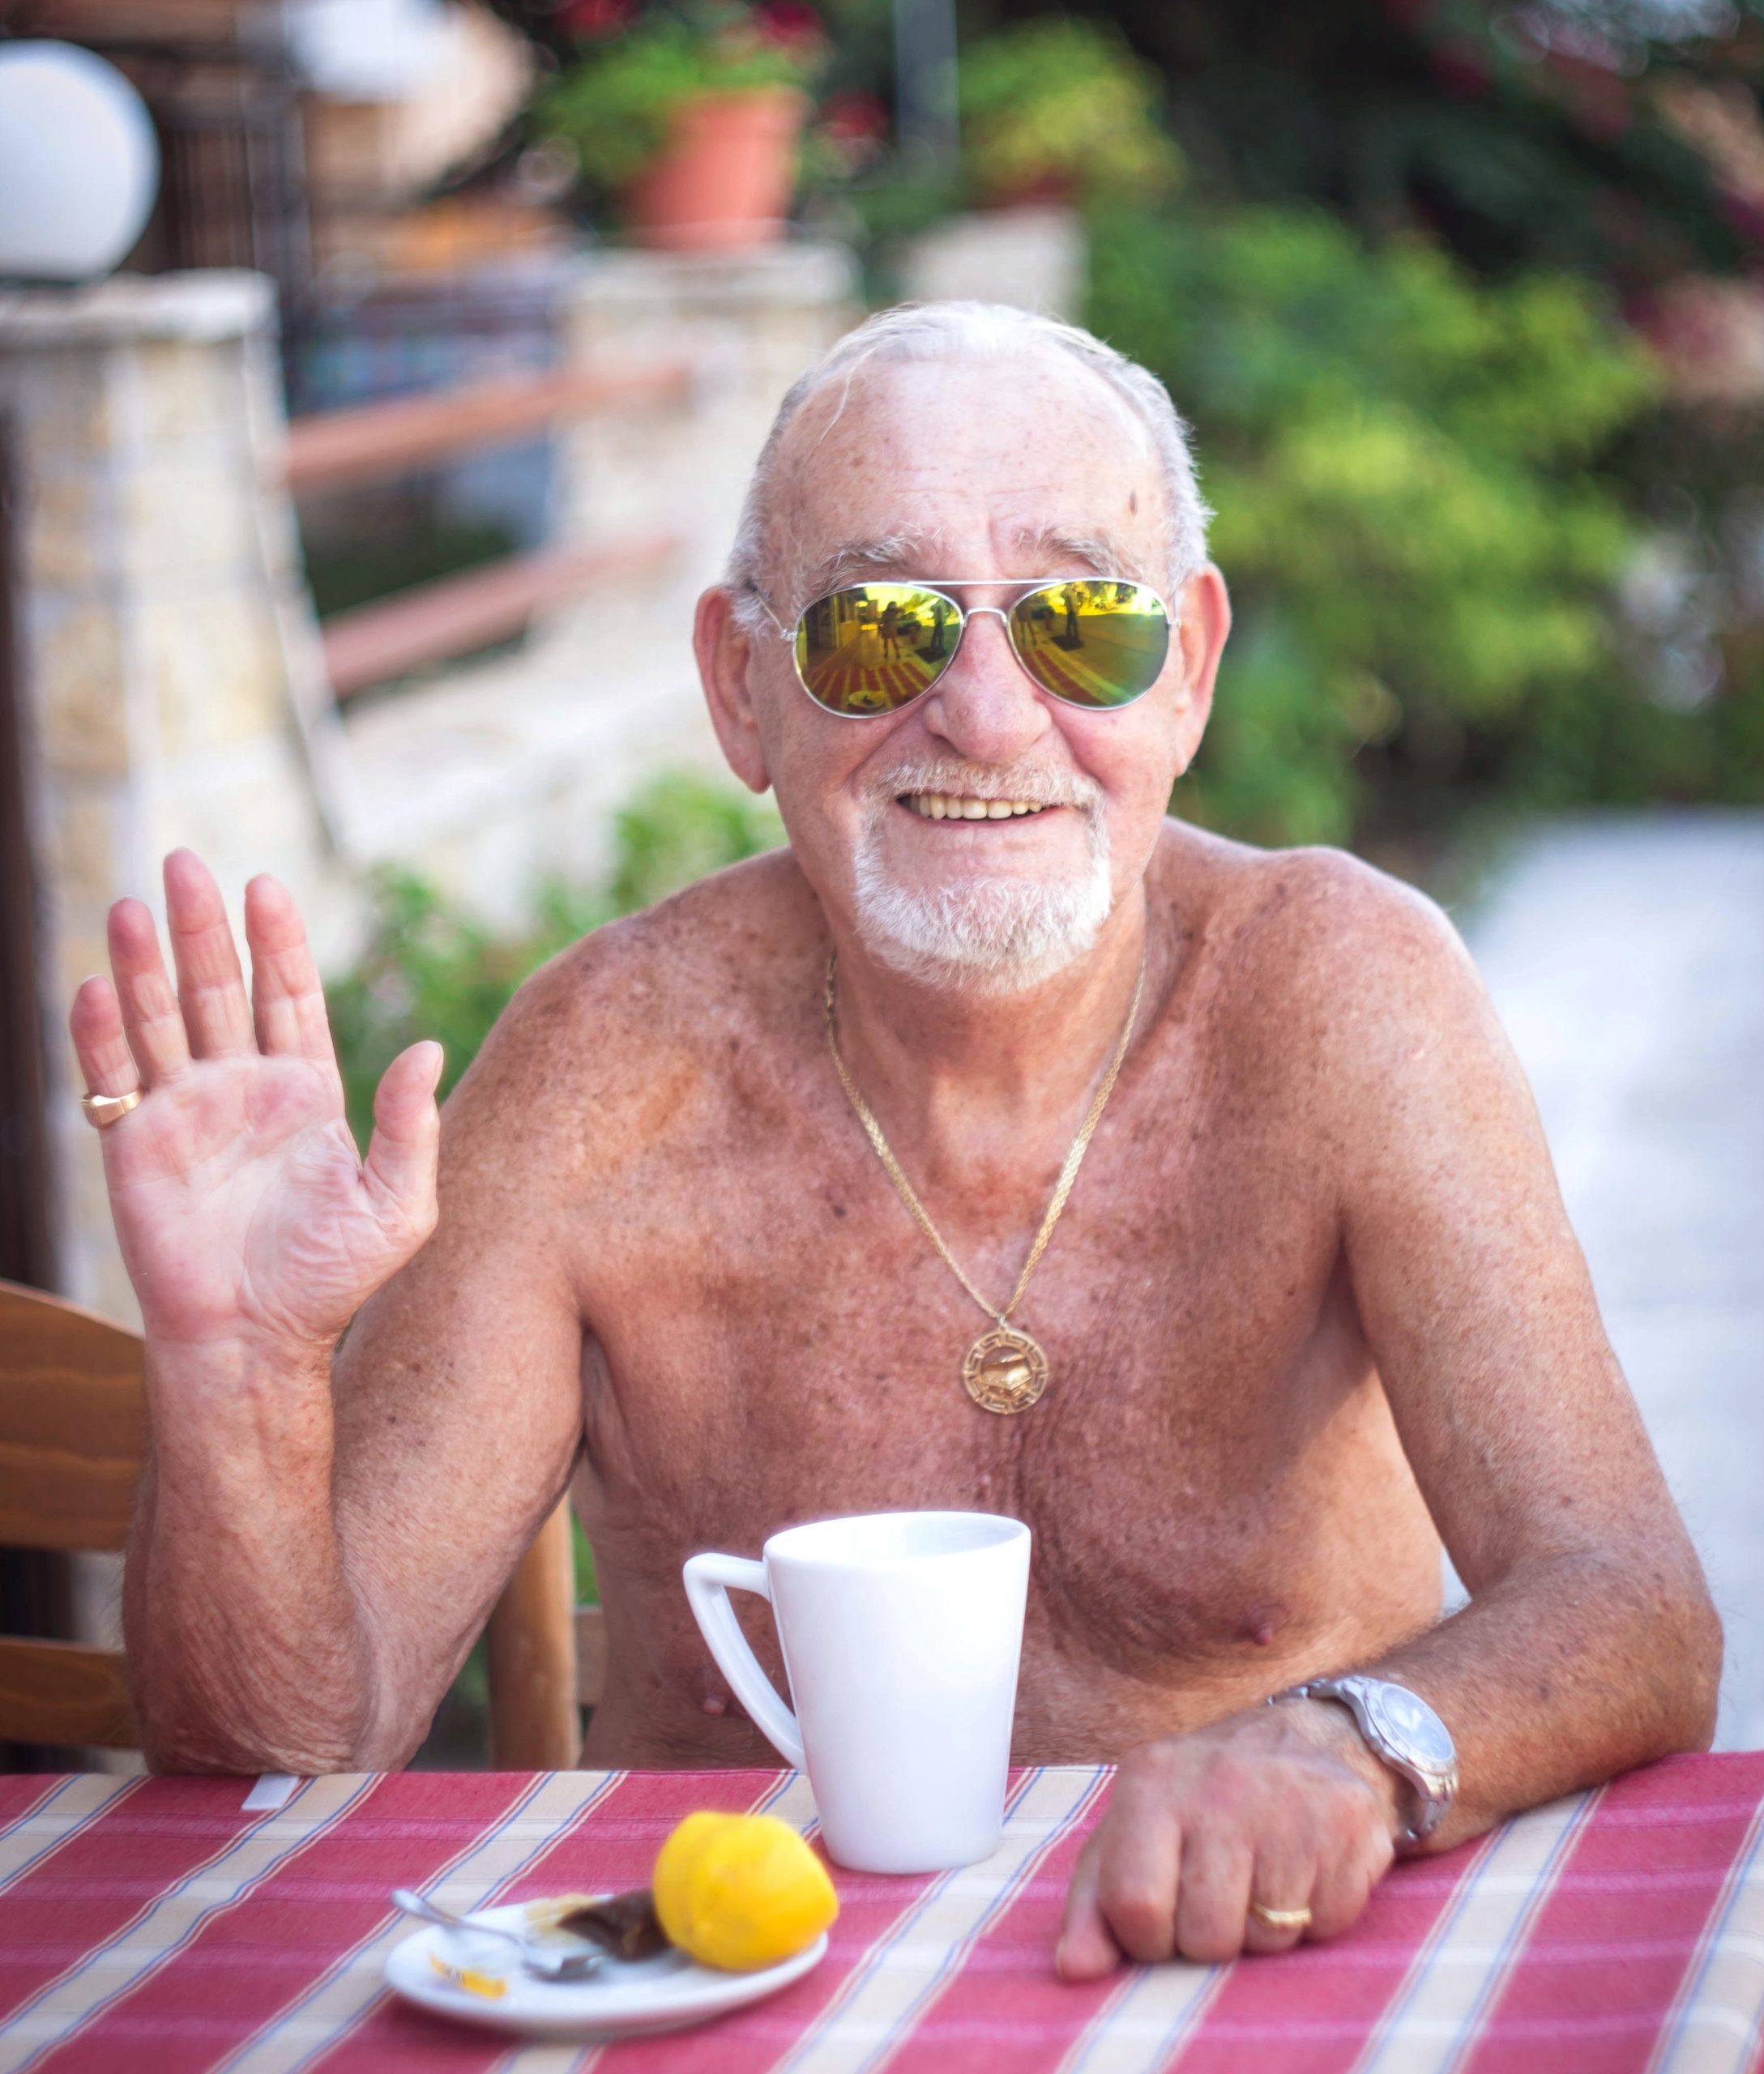 Friendly older gentleman sitting shirtless at a table smiling and waving